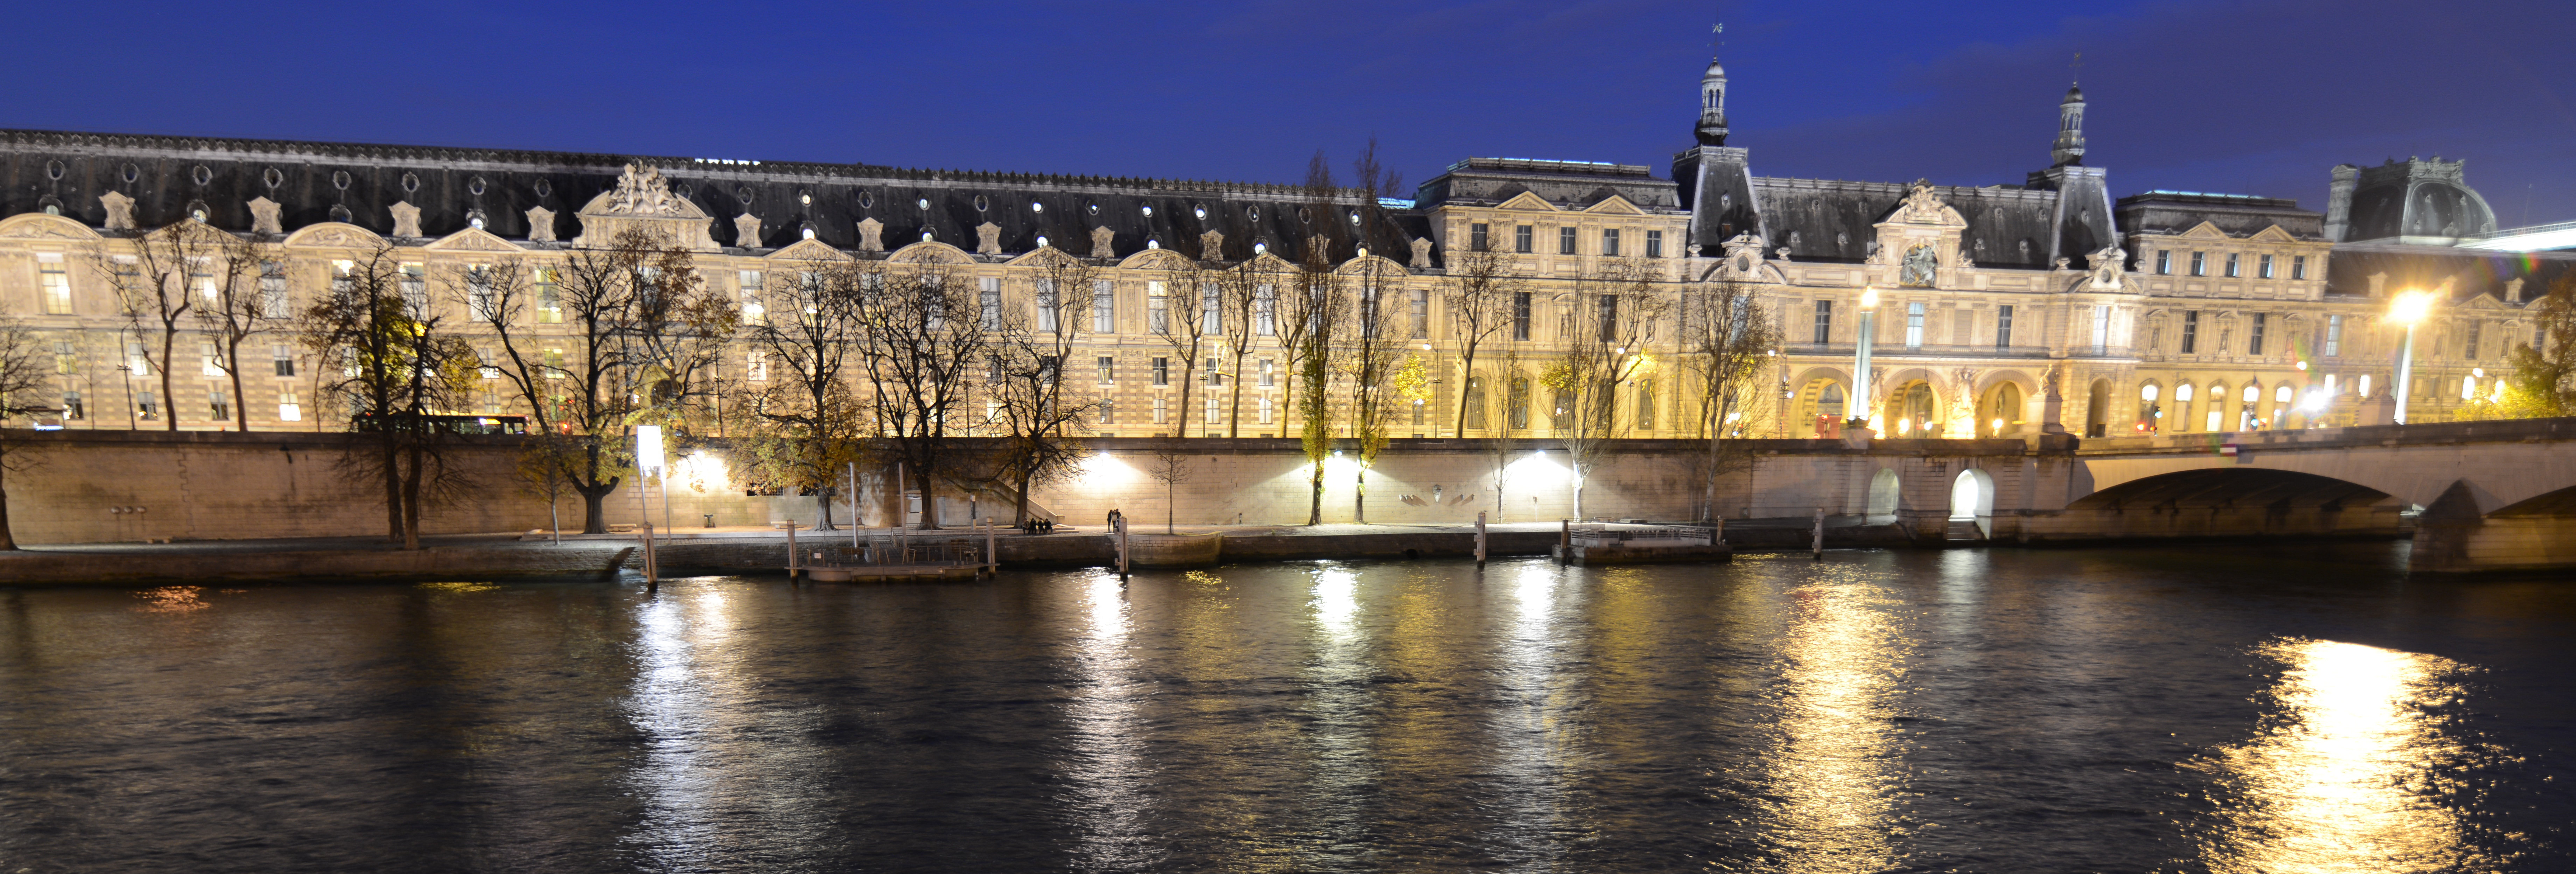 File:Seine and Musée du Louvre (22265019340).jpg - Wikimedia Commons